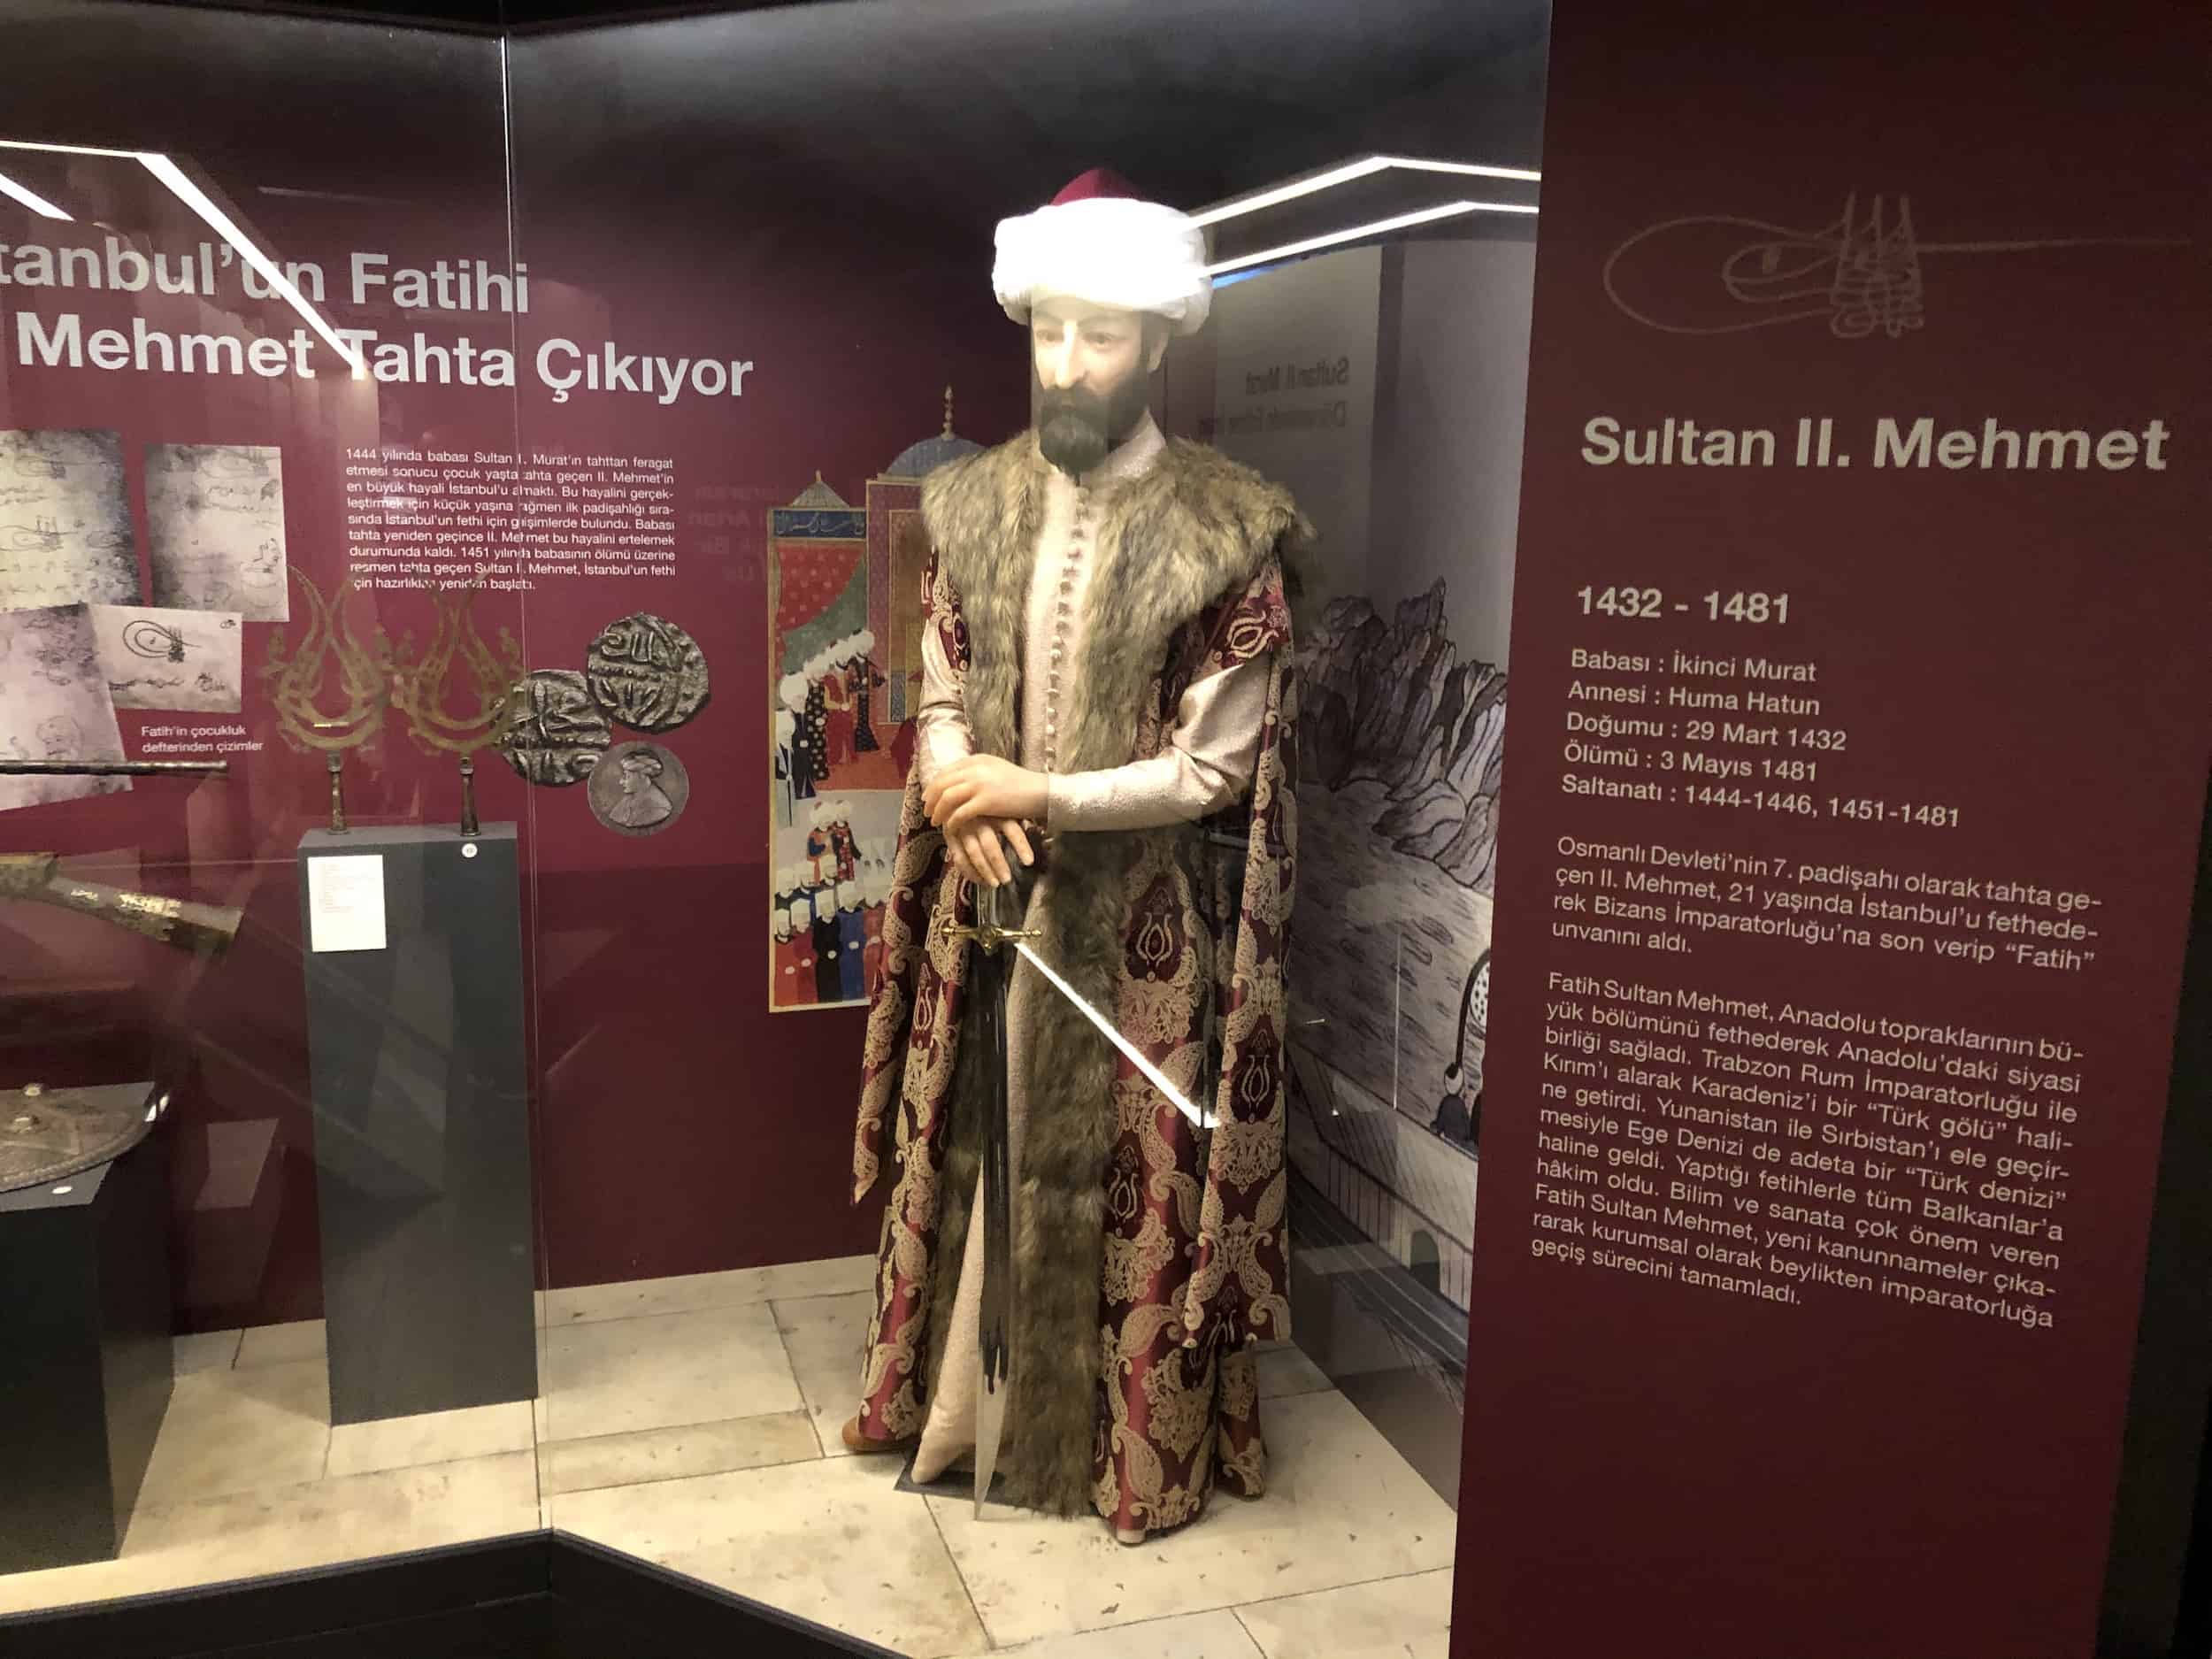 Mehmed the Conqueror at the Edirne City Museum in Edirne, Turkey